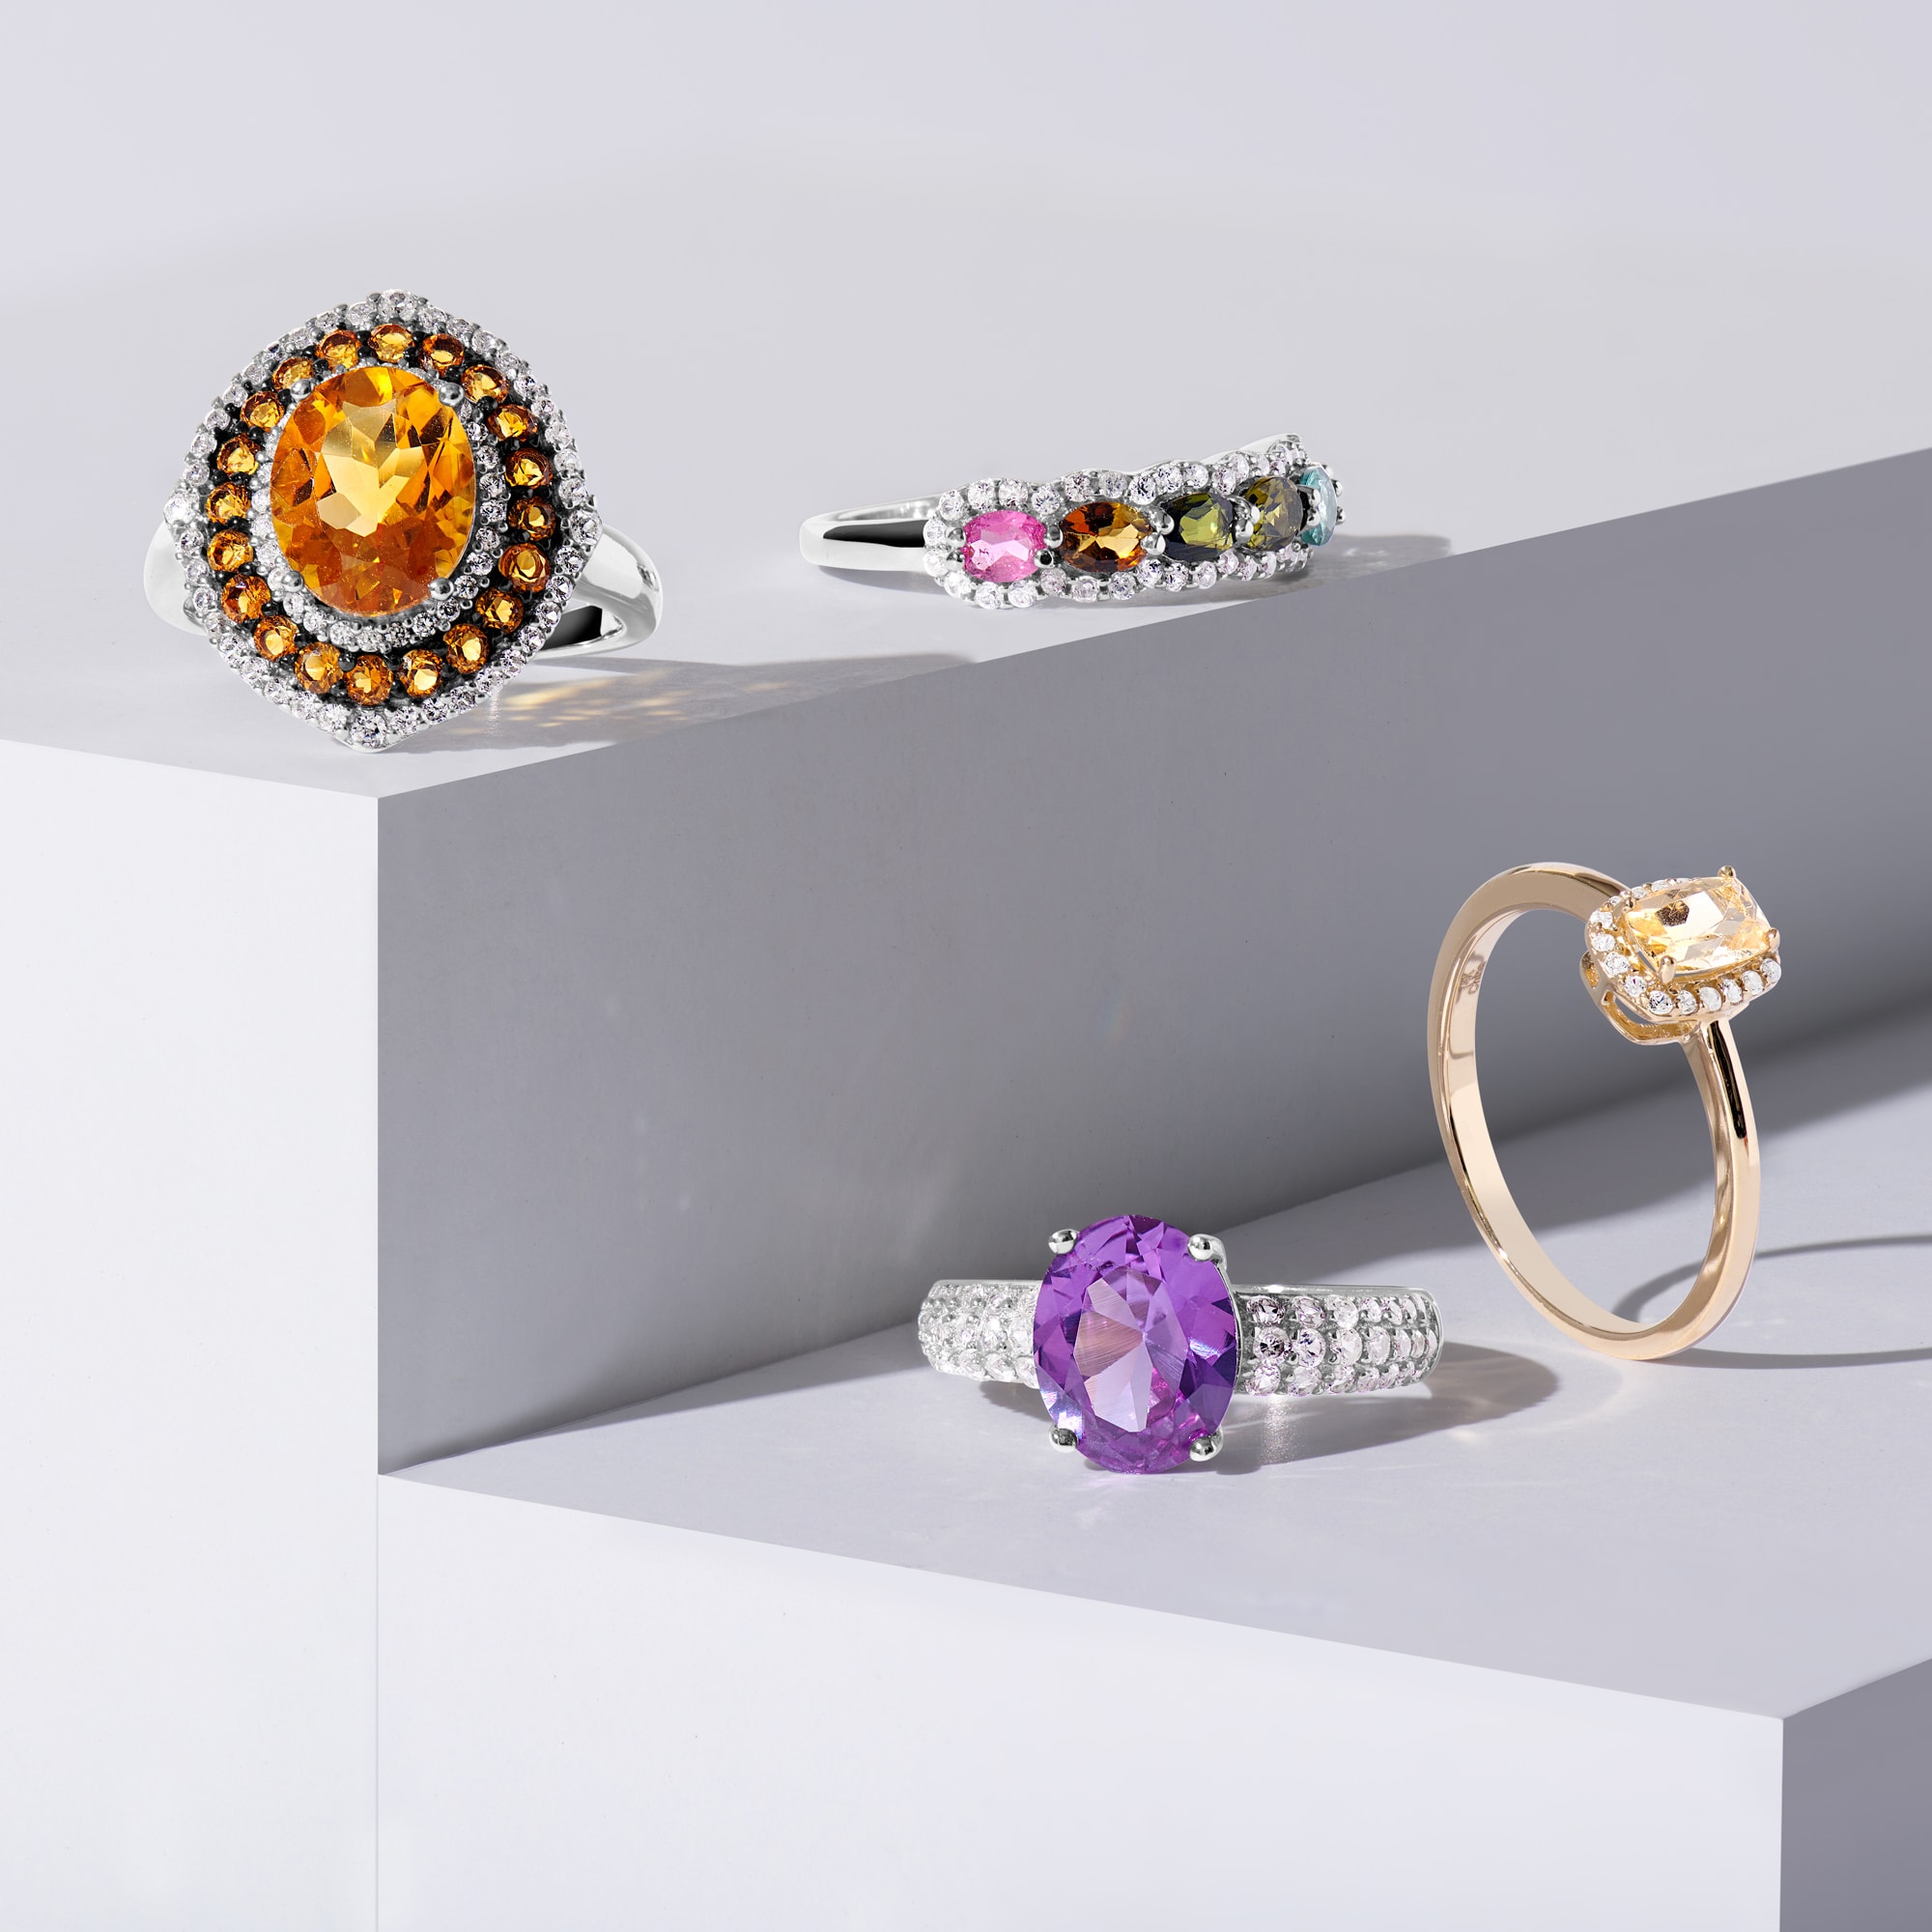 Liven up your day with a pop of vibrant gems from Netaya's gemstone collection.